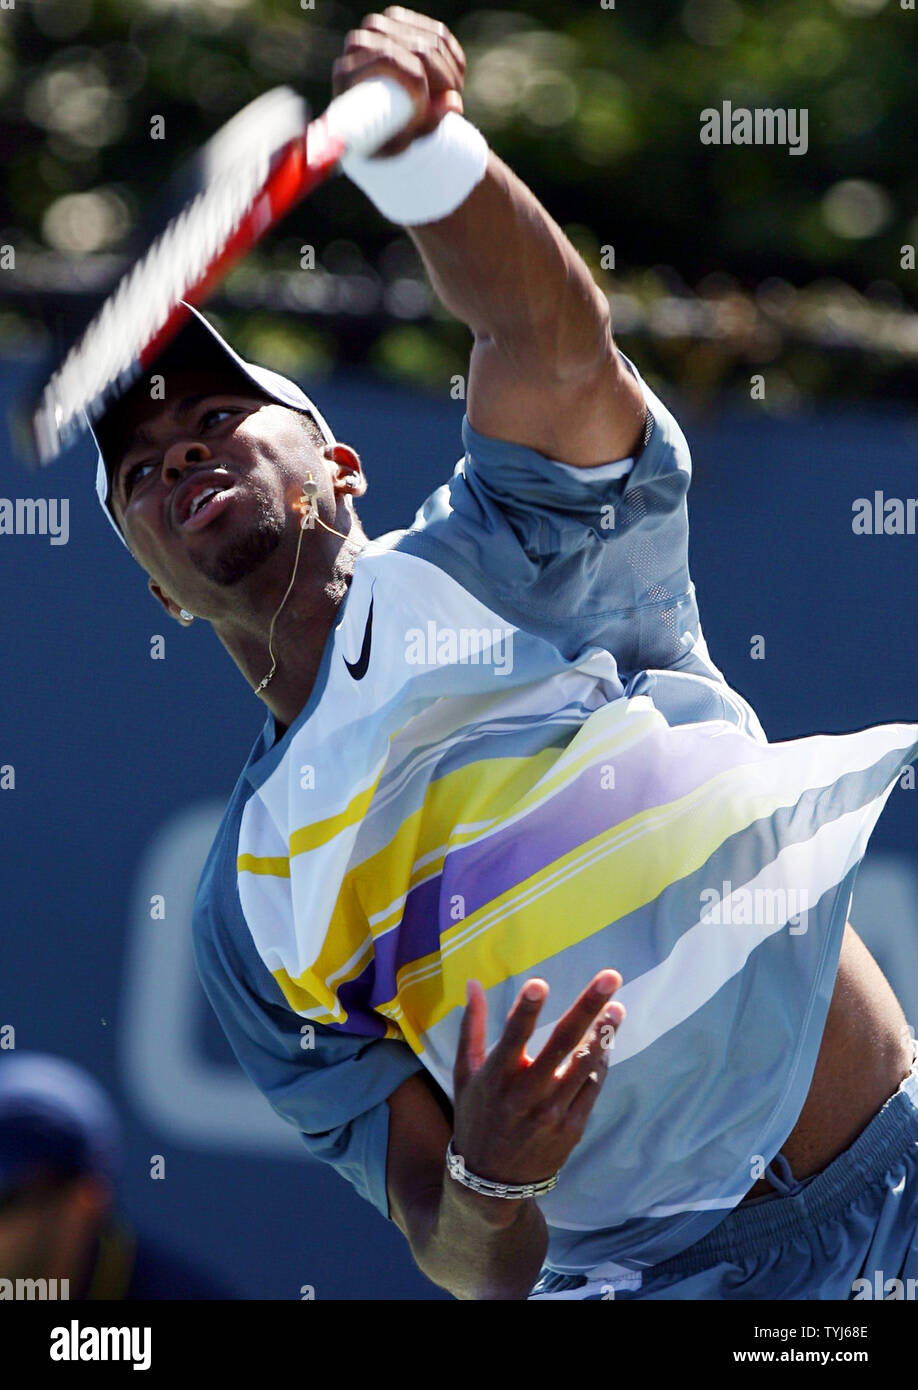 Donald Young hits a serve in the first set of his match against Chris Guccione at the U.S. Open in New York City on August 27, 2007.  (UPI Photo/John Angelillo) Stock Photo